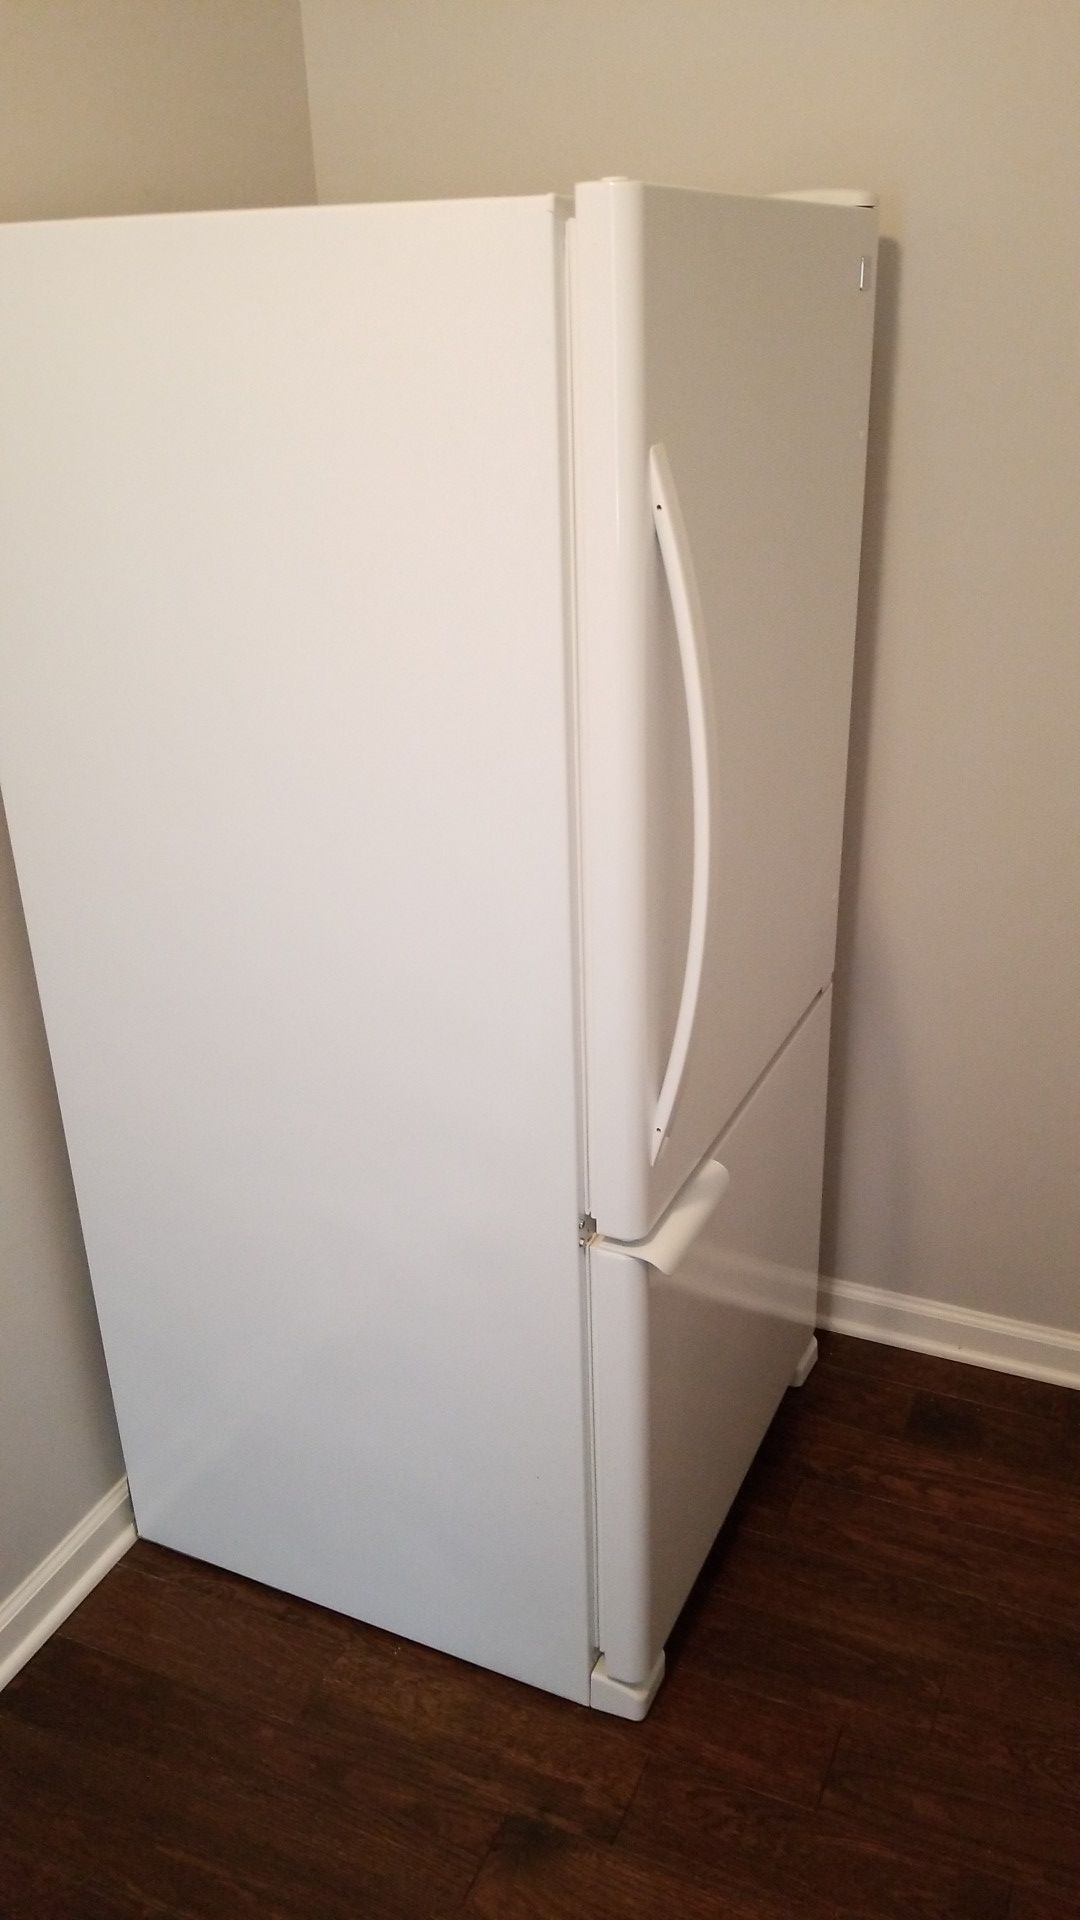 Kenmore Refrigerator - Great Condition (2 yrs old)